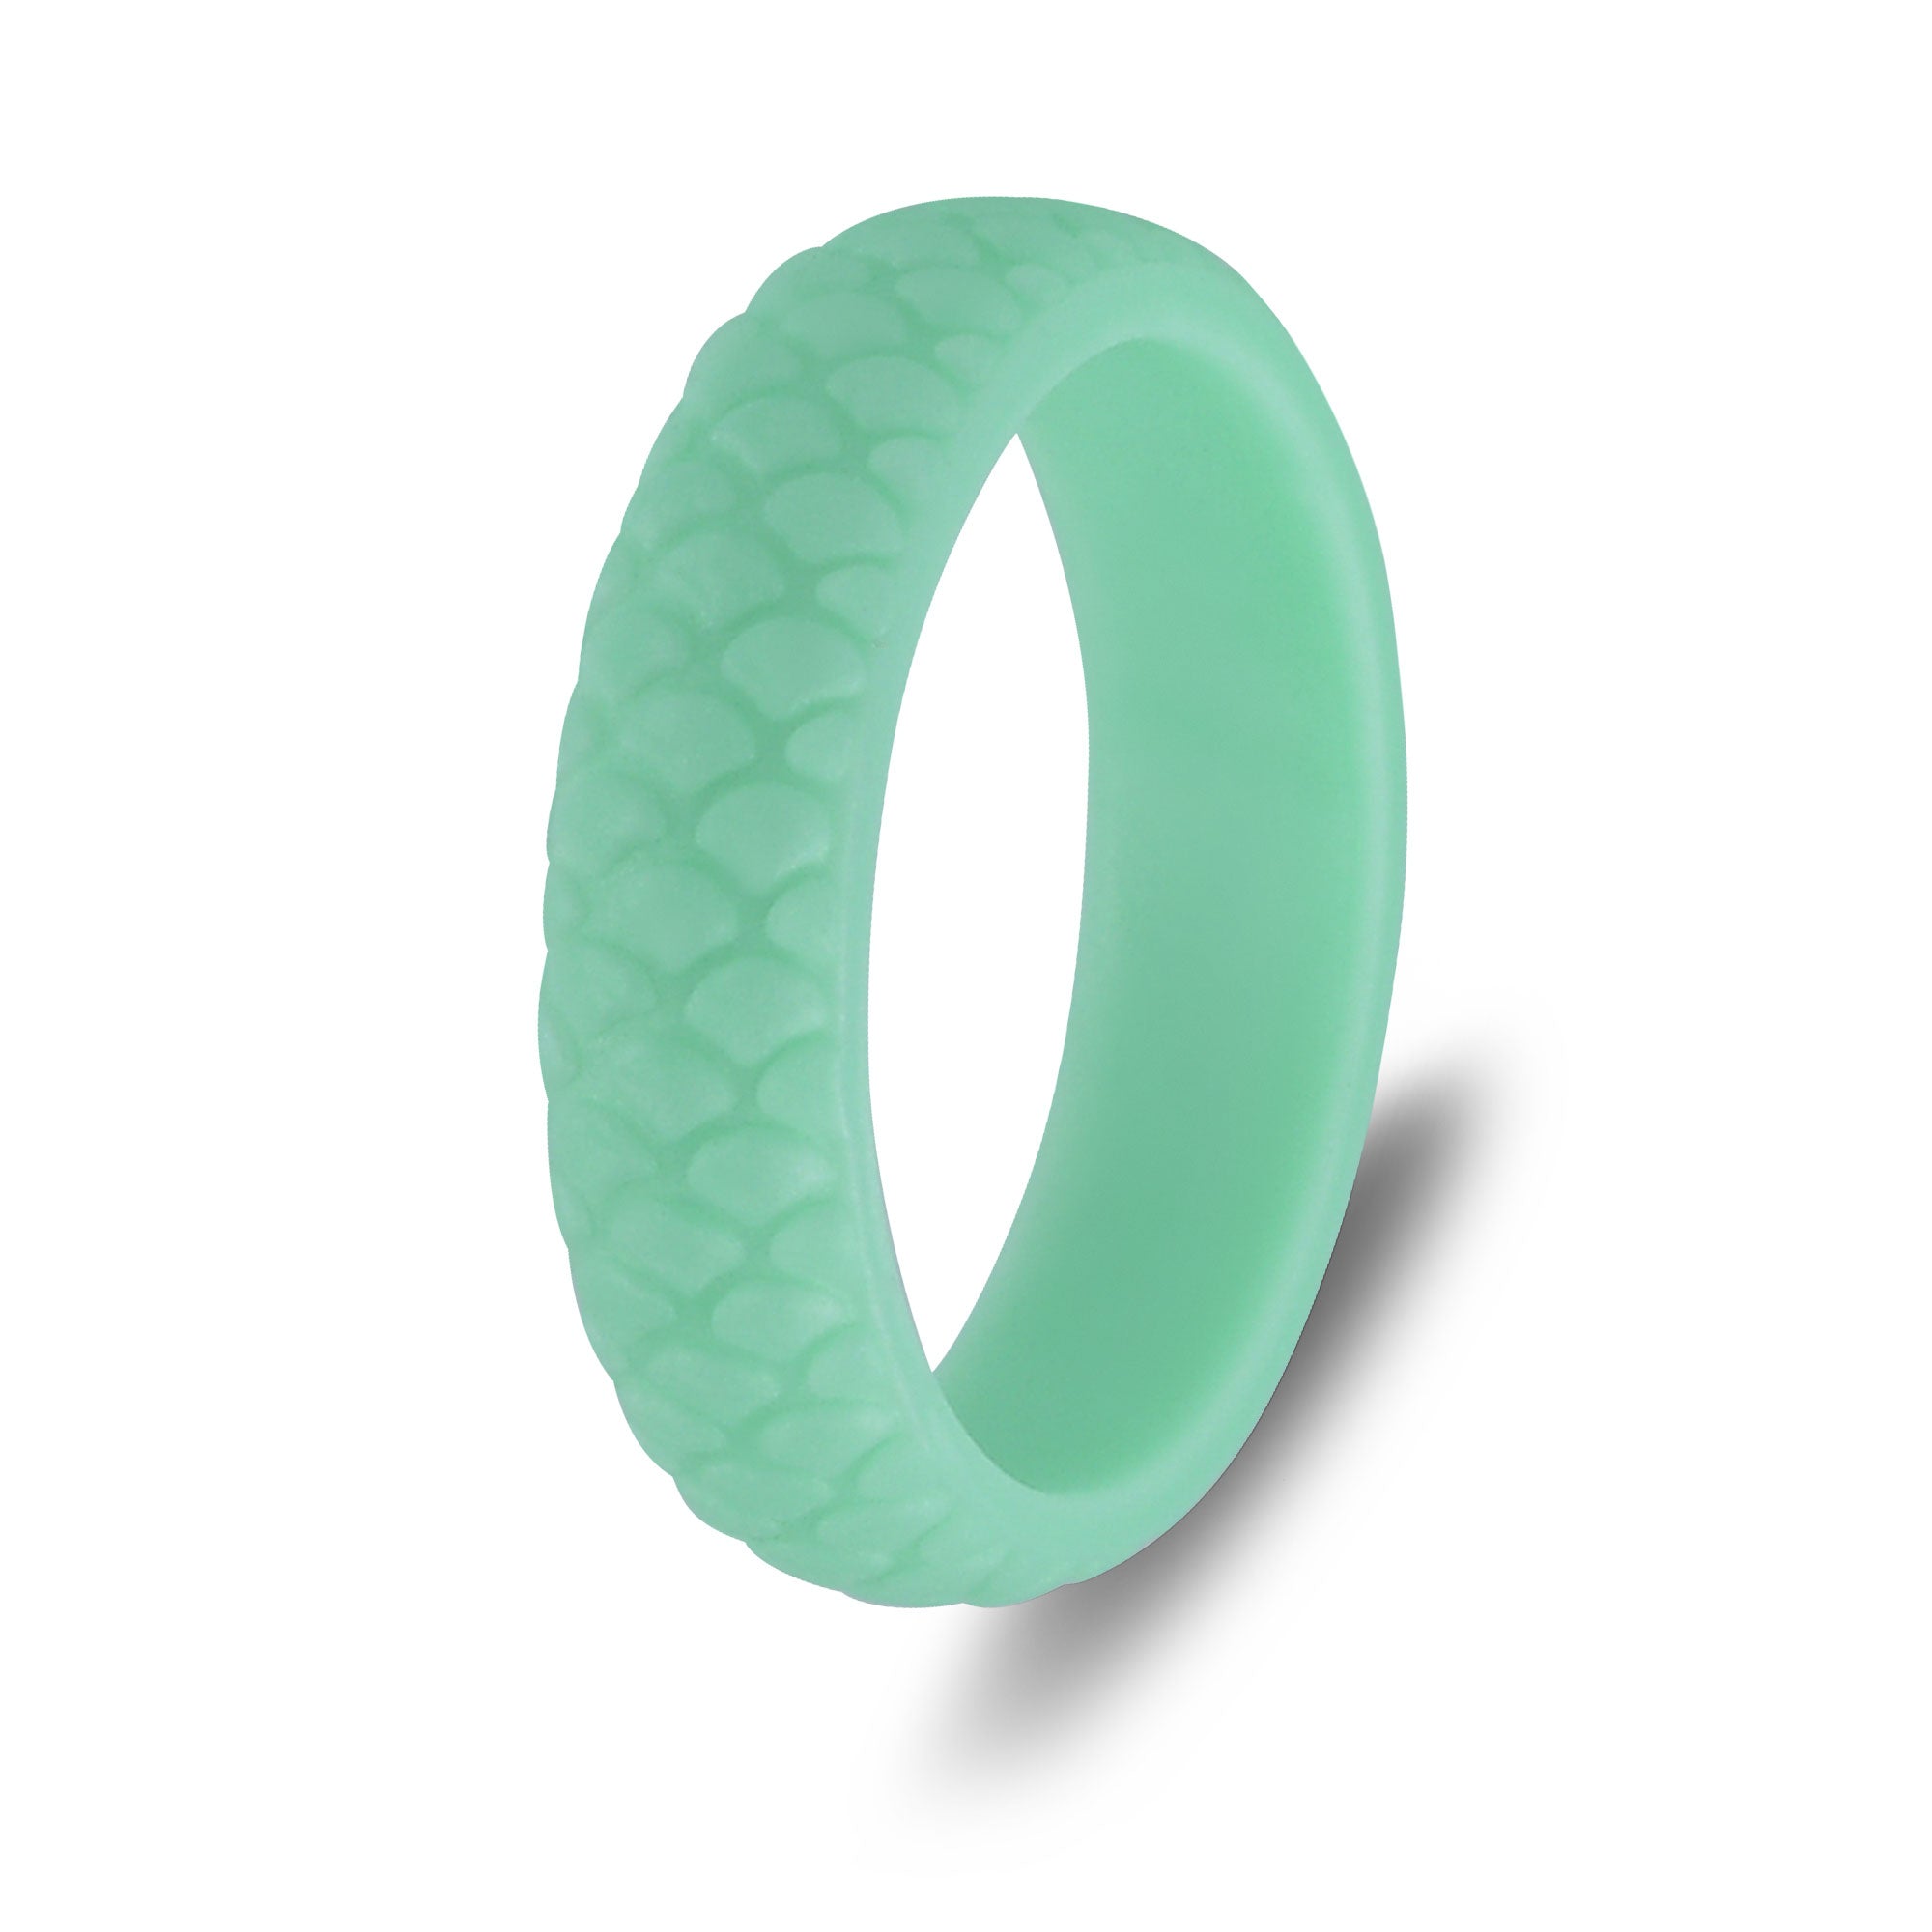 The Turquoise Sea - Silicone Ring